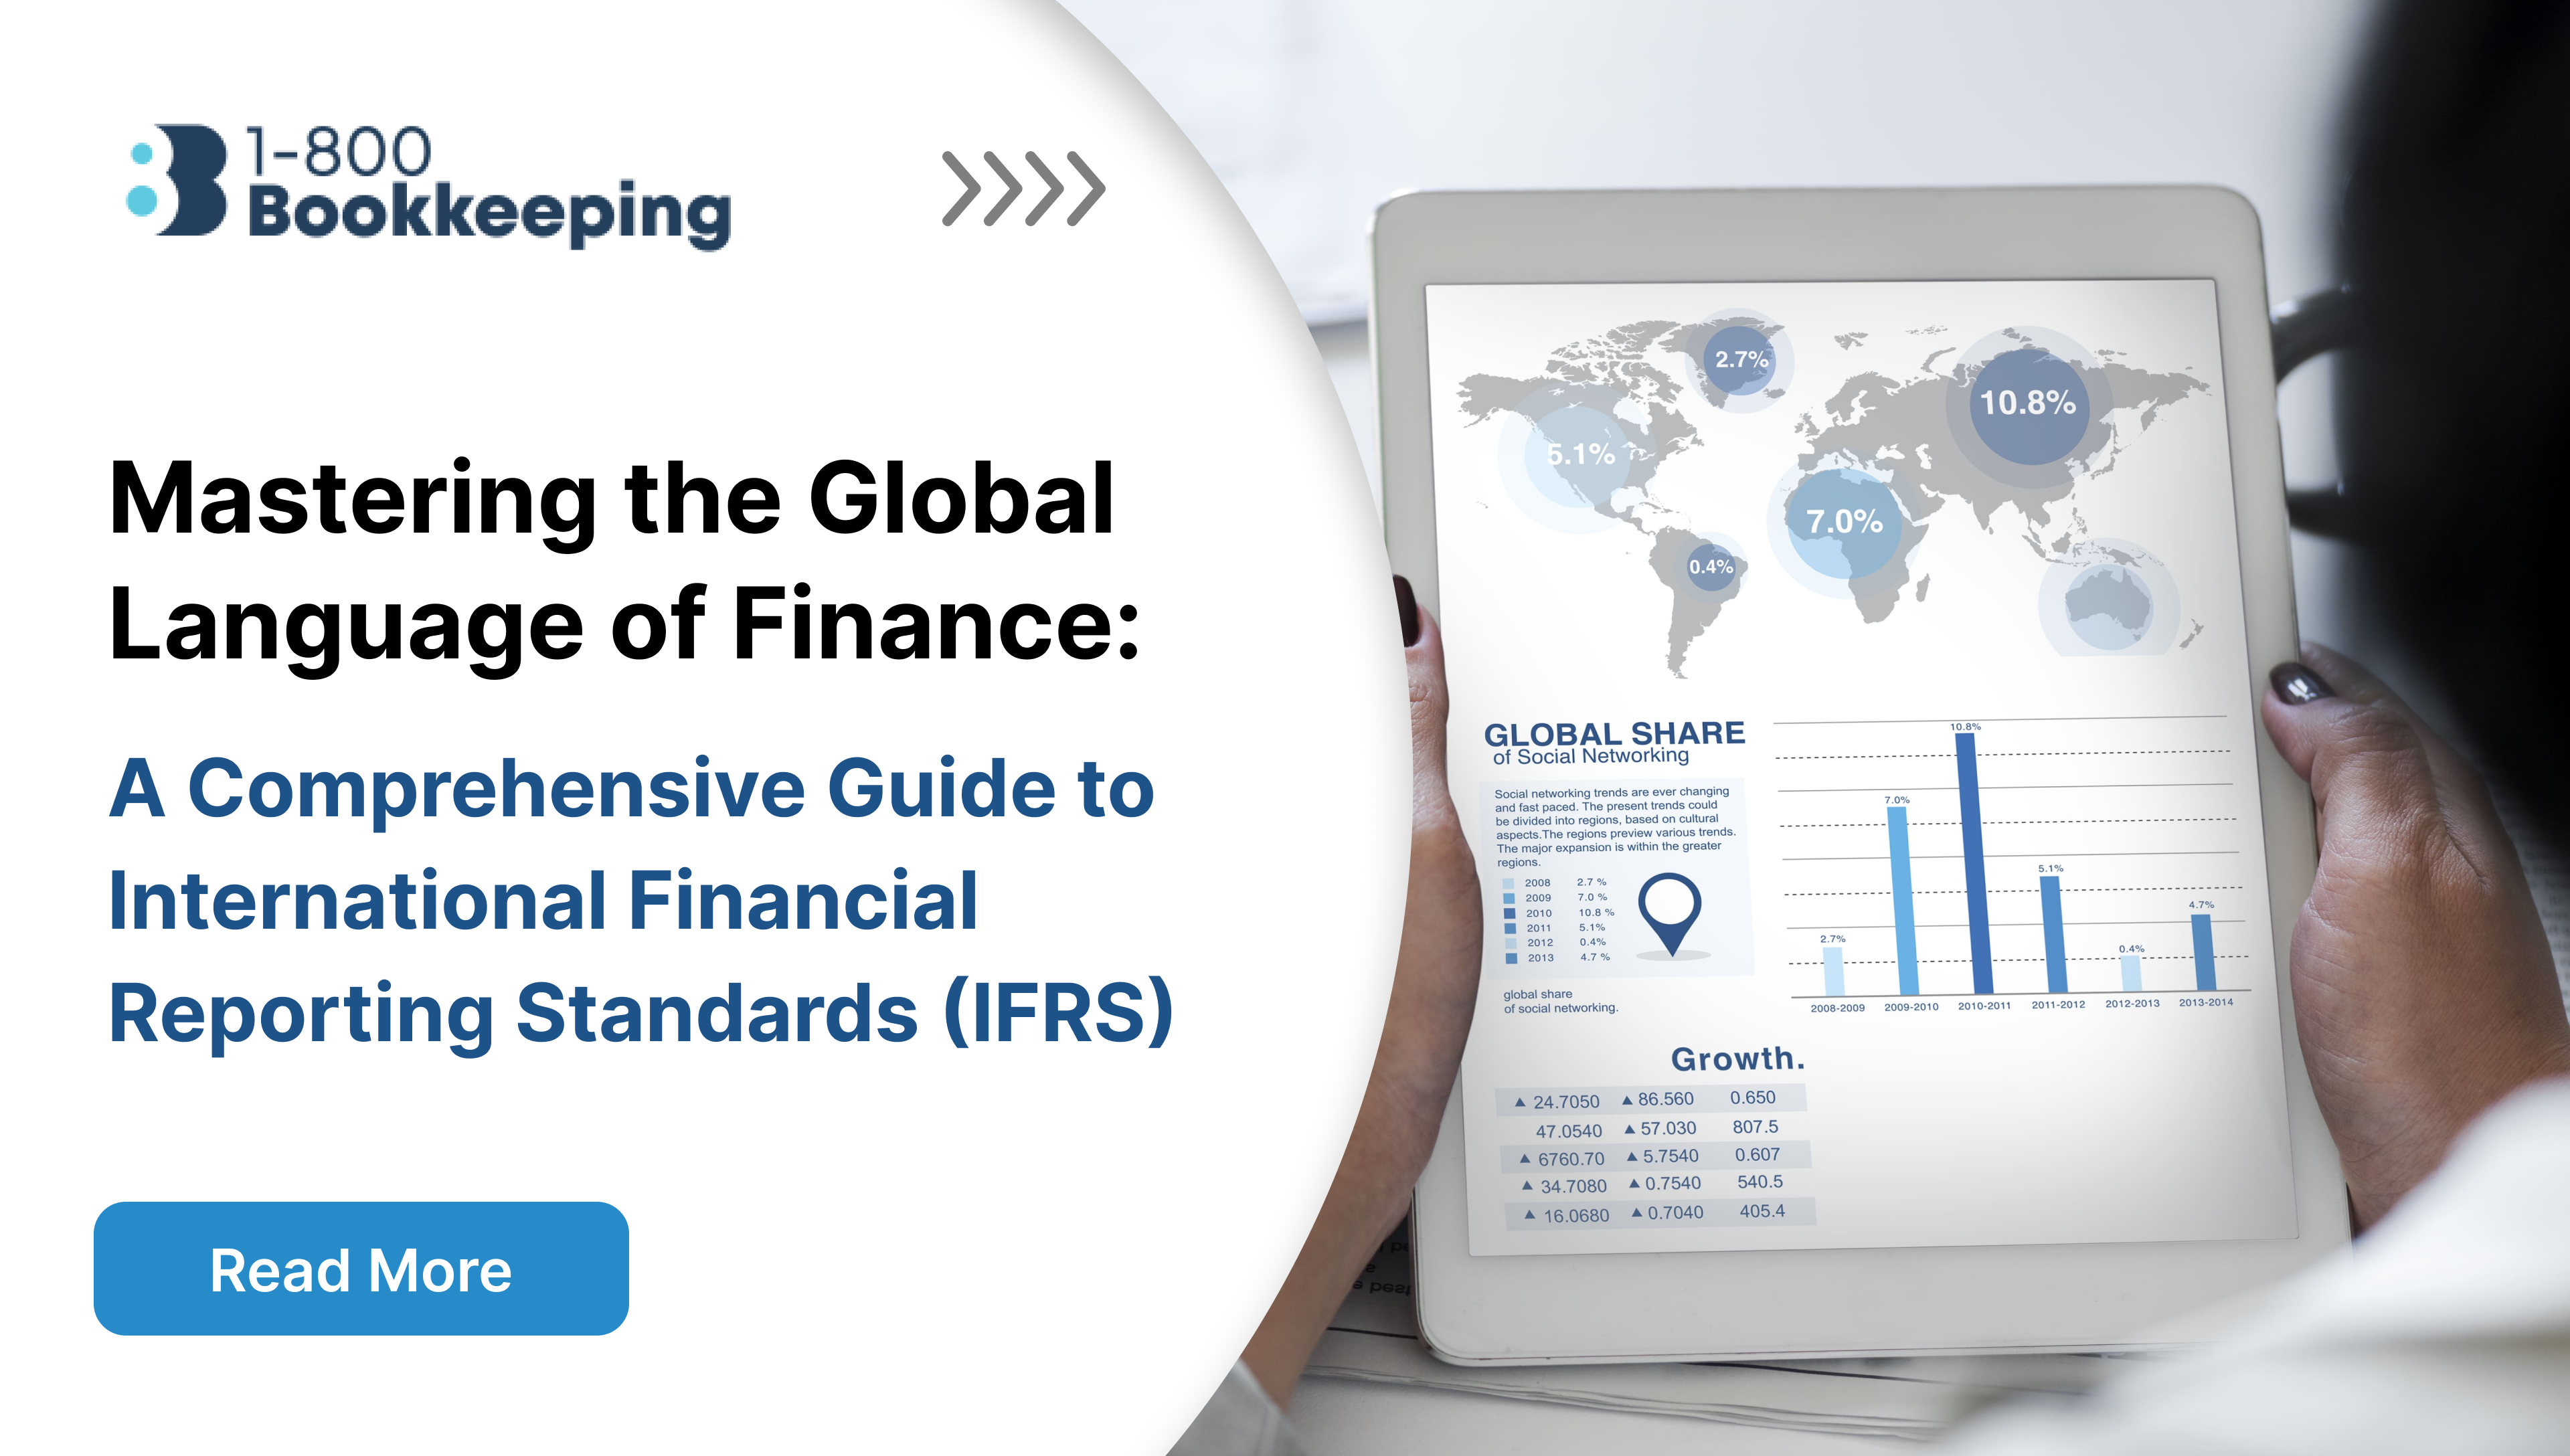 Mastering the Global Language of Finance: A Comprehensive Guide to International Financial Reporting Standards (IFRS)